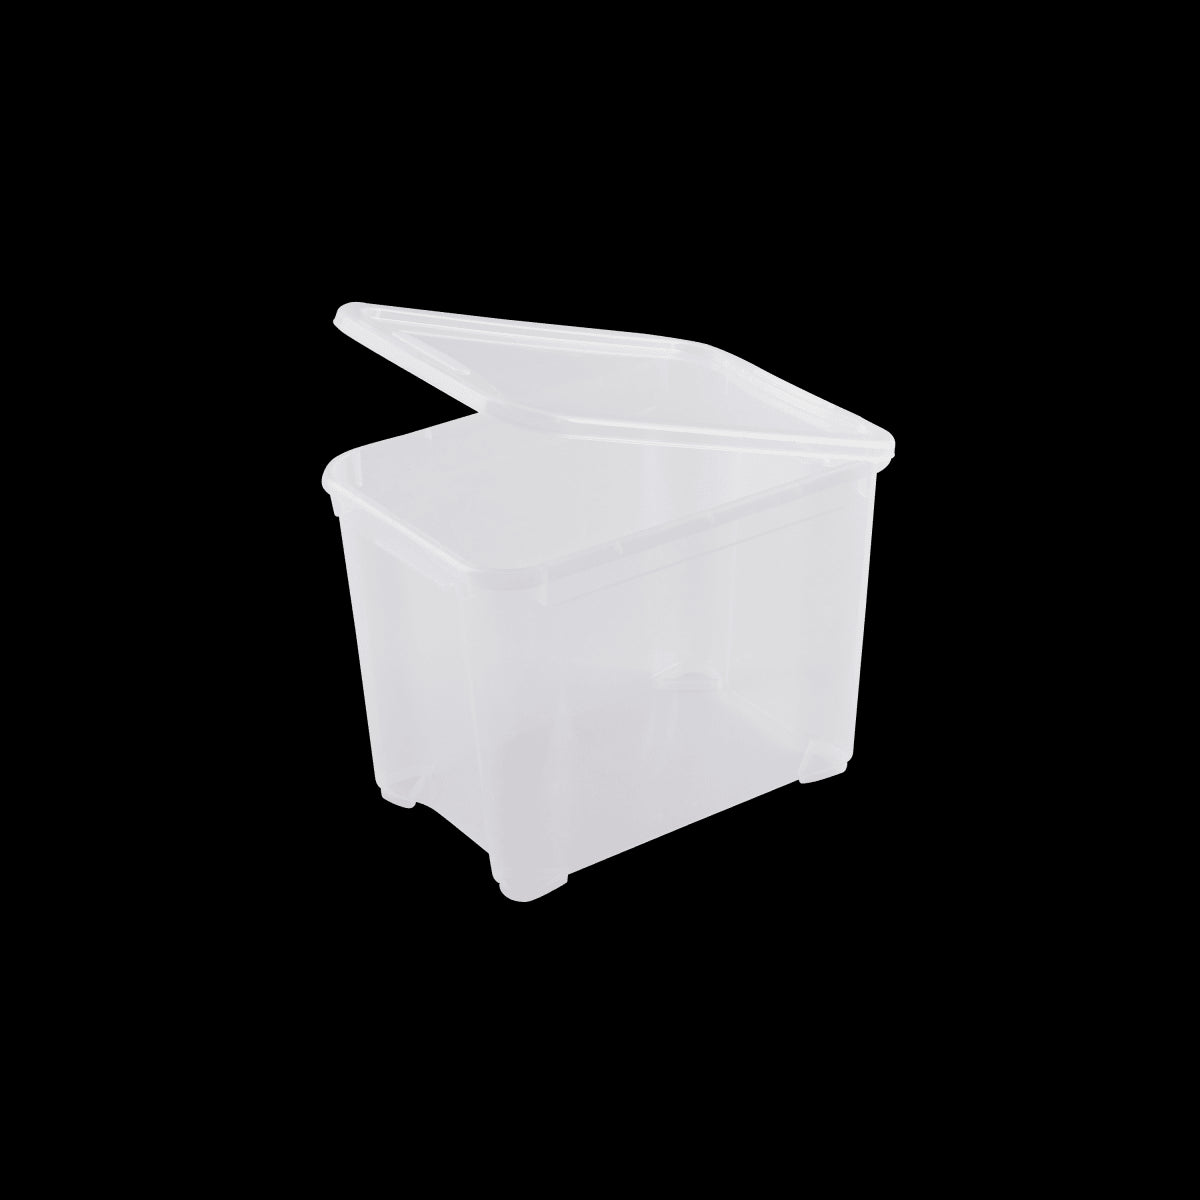 CONTAINER WITH LID T-BOX S W38xD26.5xH28.5CM 18LT TRANSPARENT PLASTIC LID